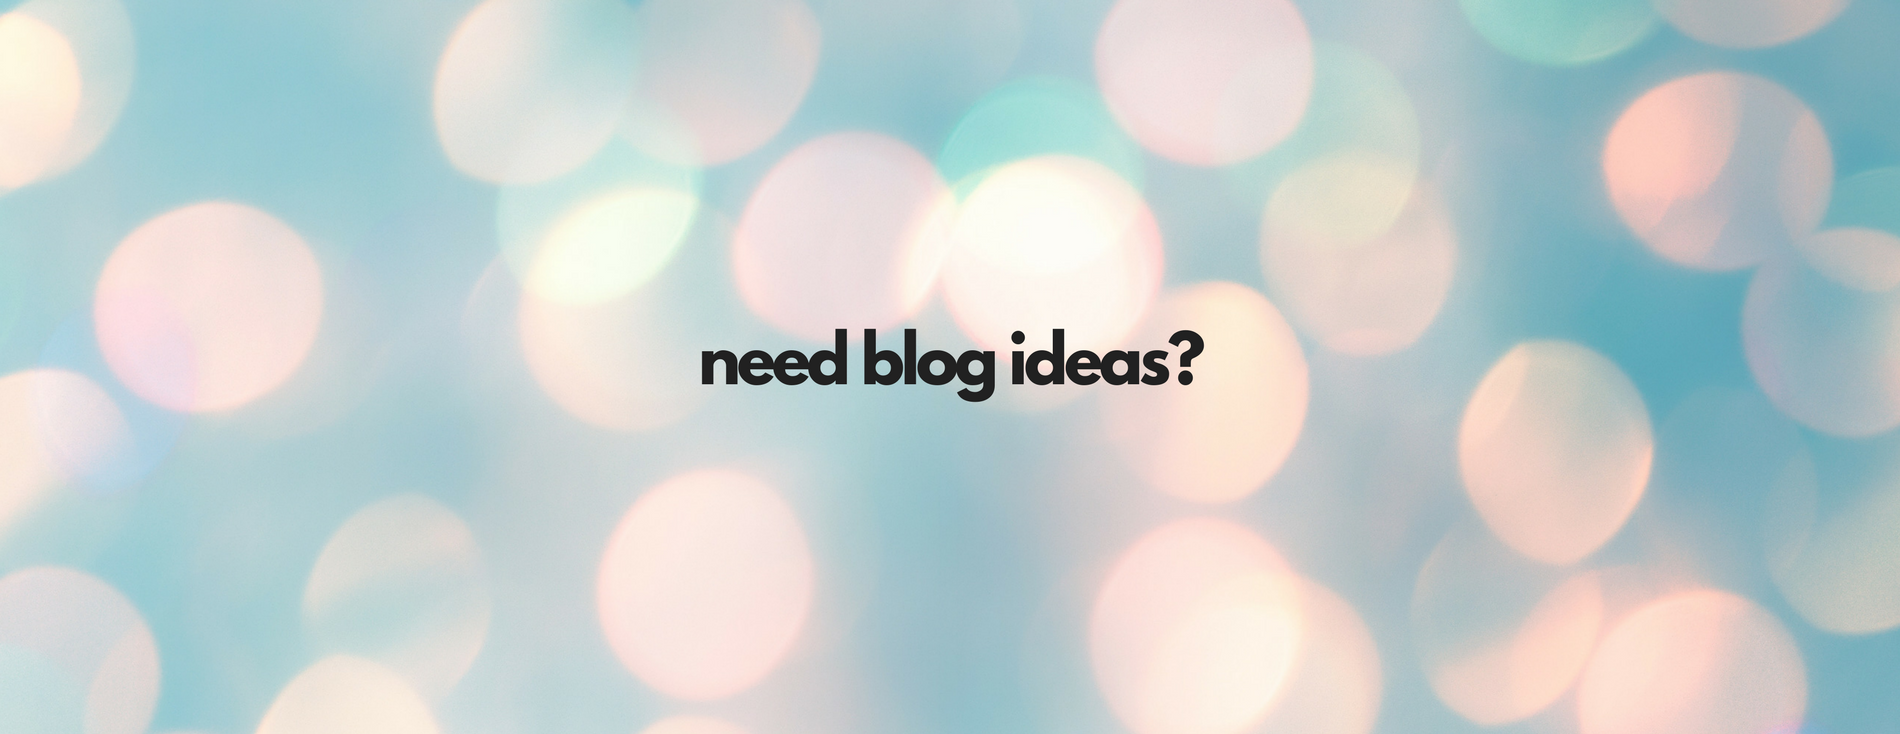 How to Find Blog Ideas